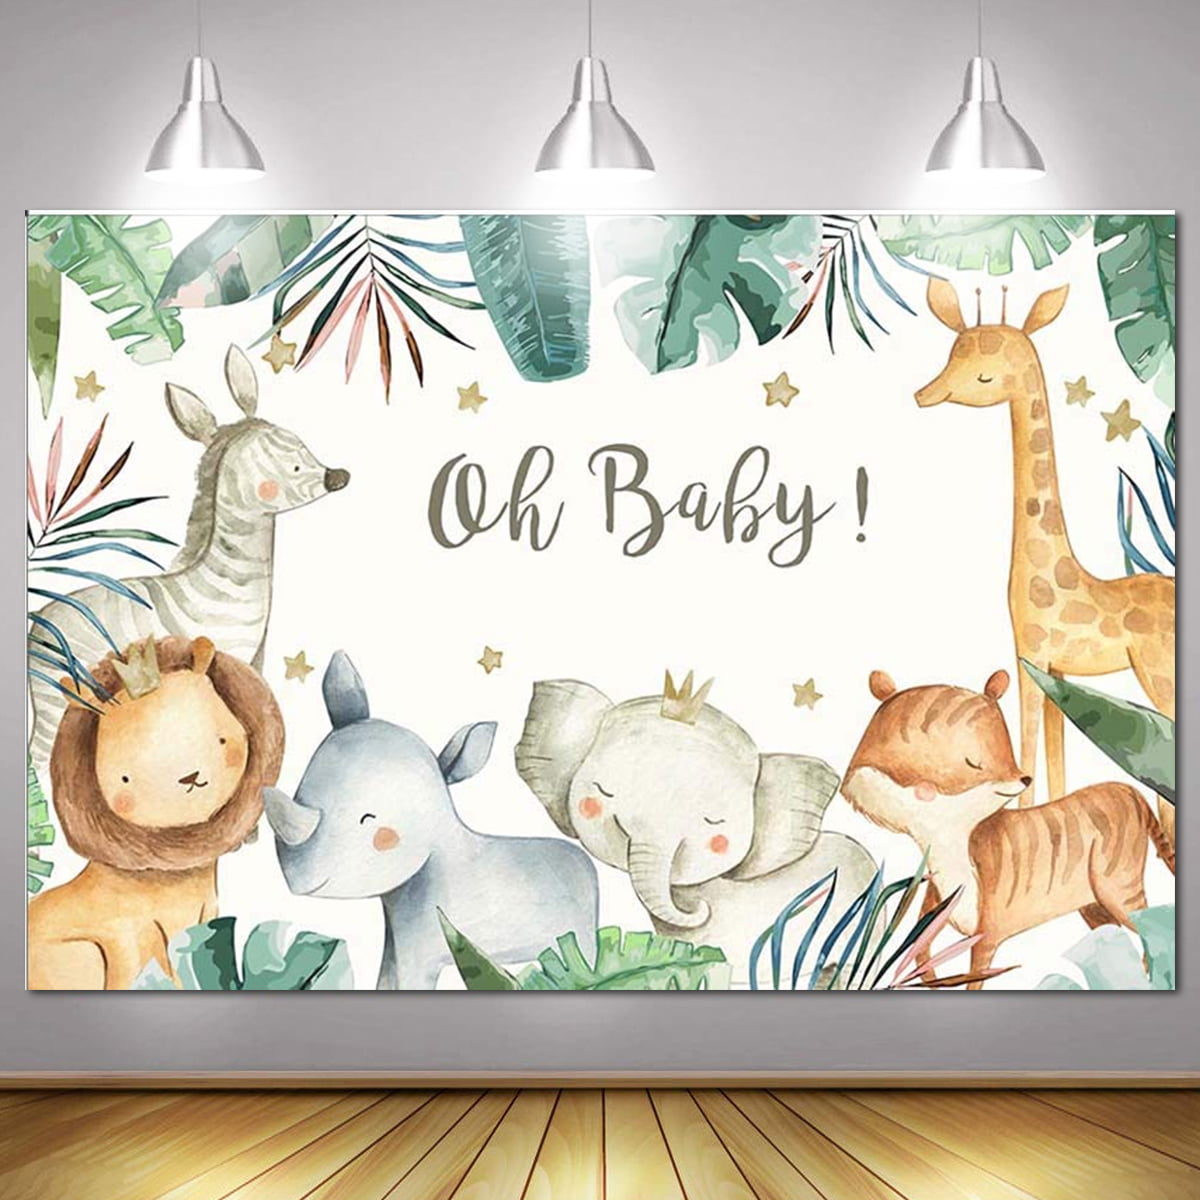 YEELE 10x8ft A Little Fox is on The Way Backdrop Boy Baby Shower Photography Background Safari Theme Kids Infant Newborn Photos Pastel Color Flower Digital Wallpaper Photobooth Studio Props